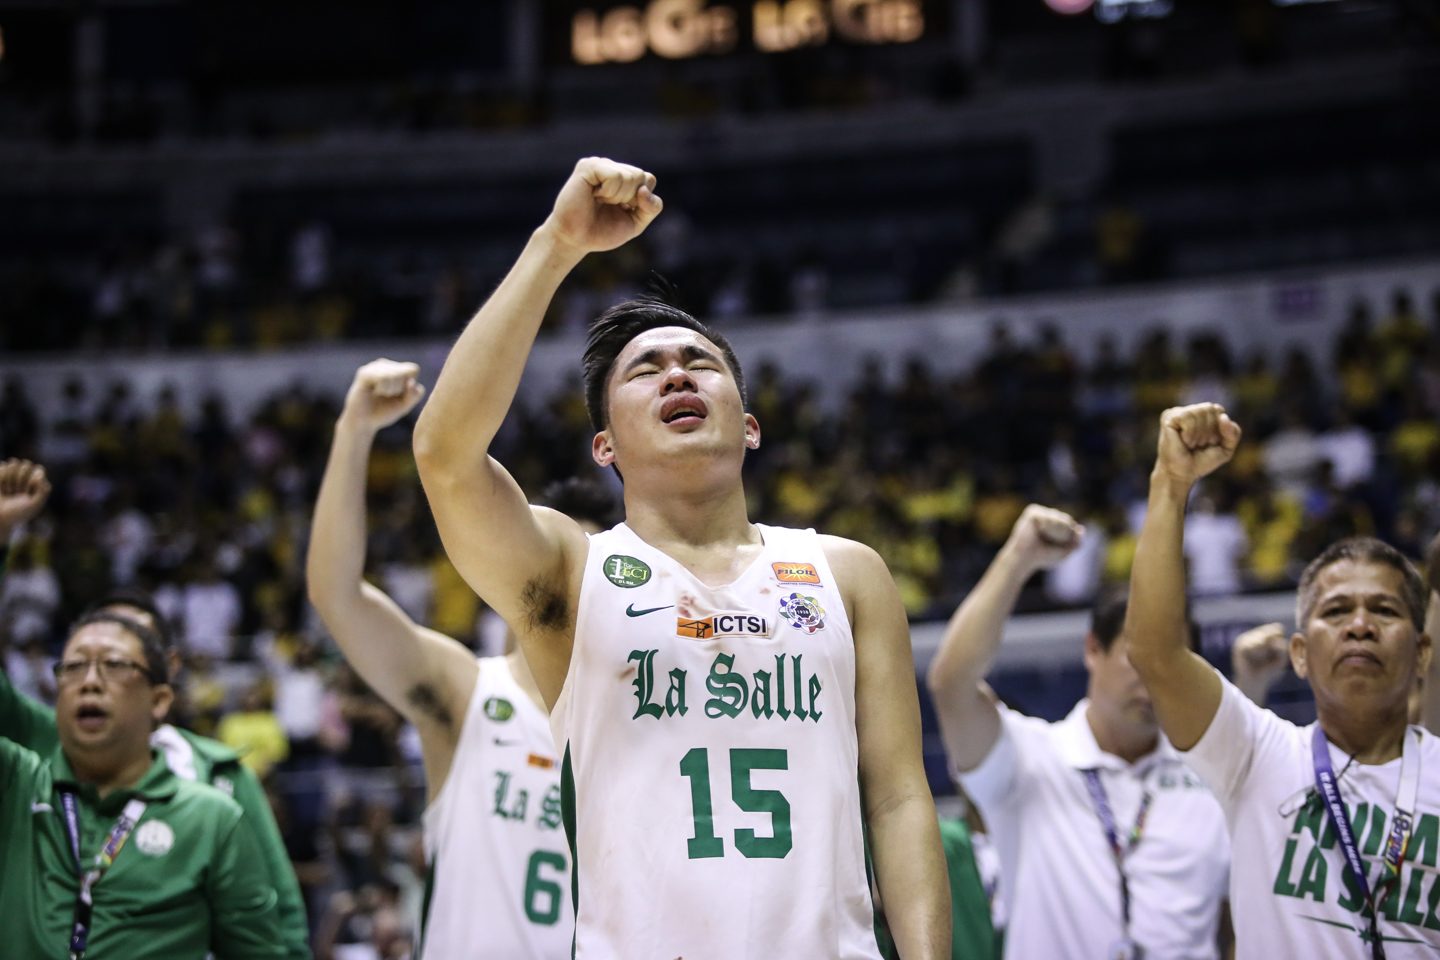 Beyond dreams: Montalbo just wanted an arena with drums